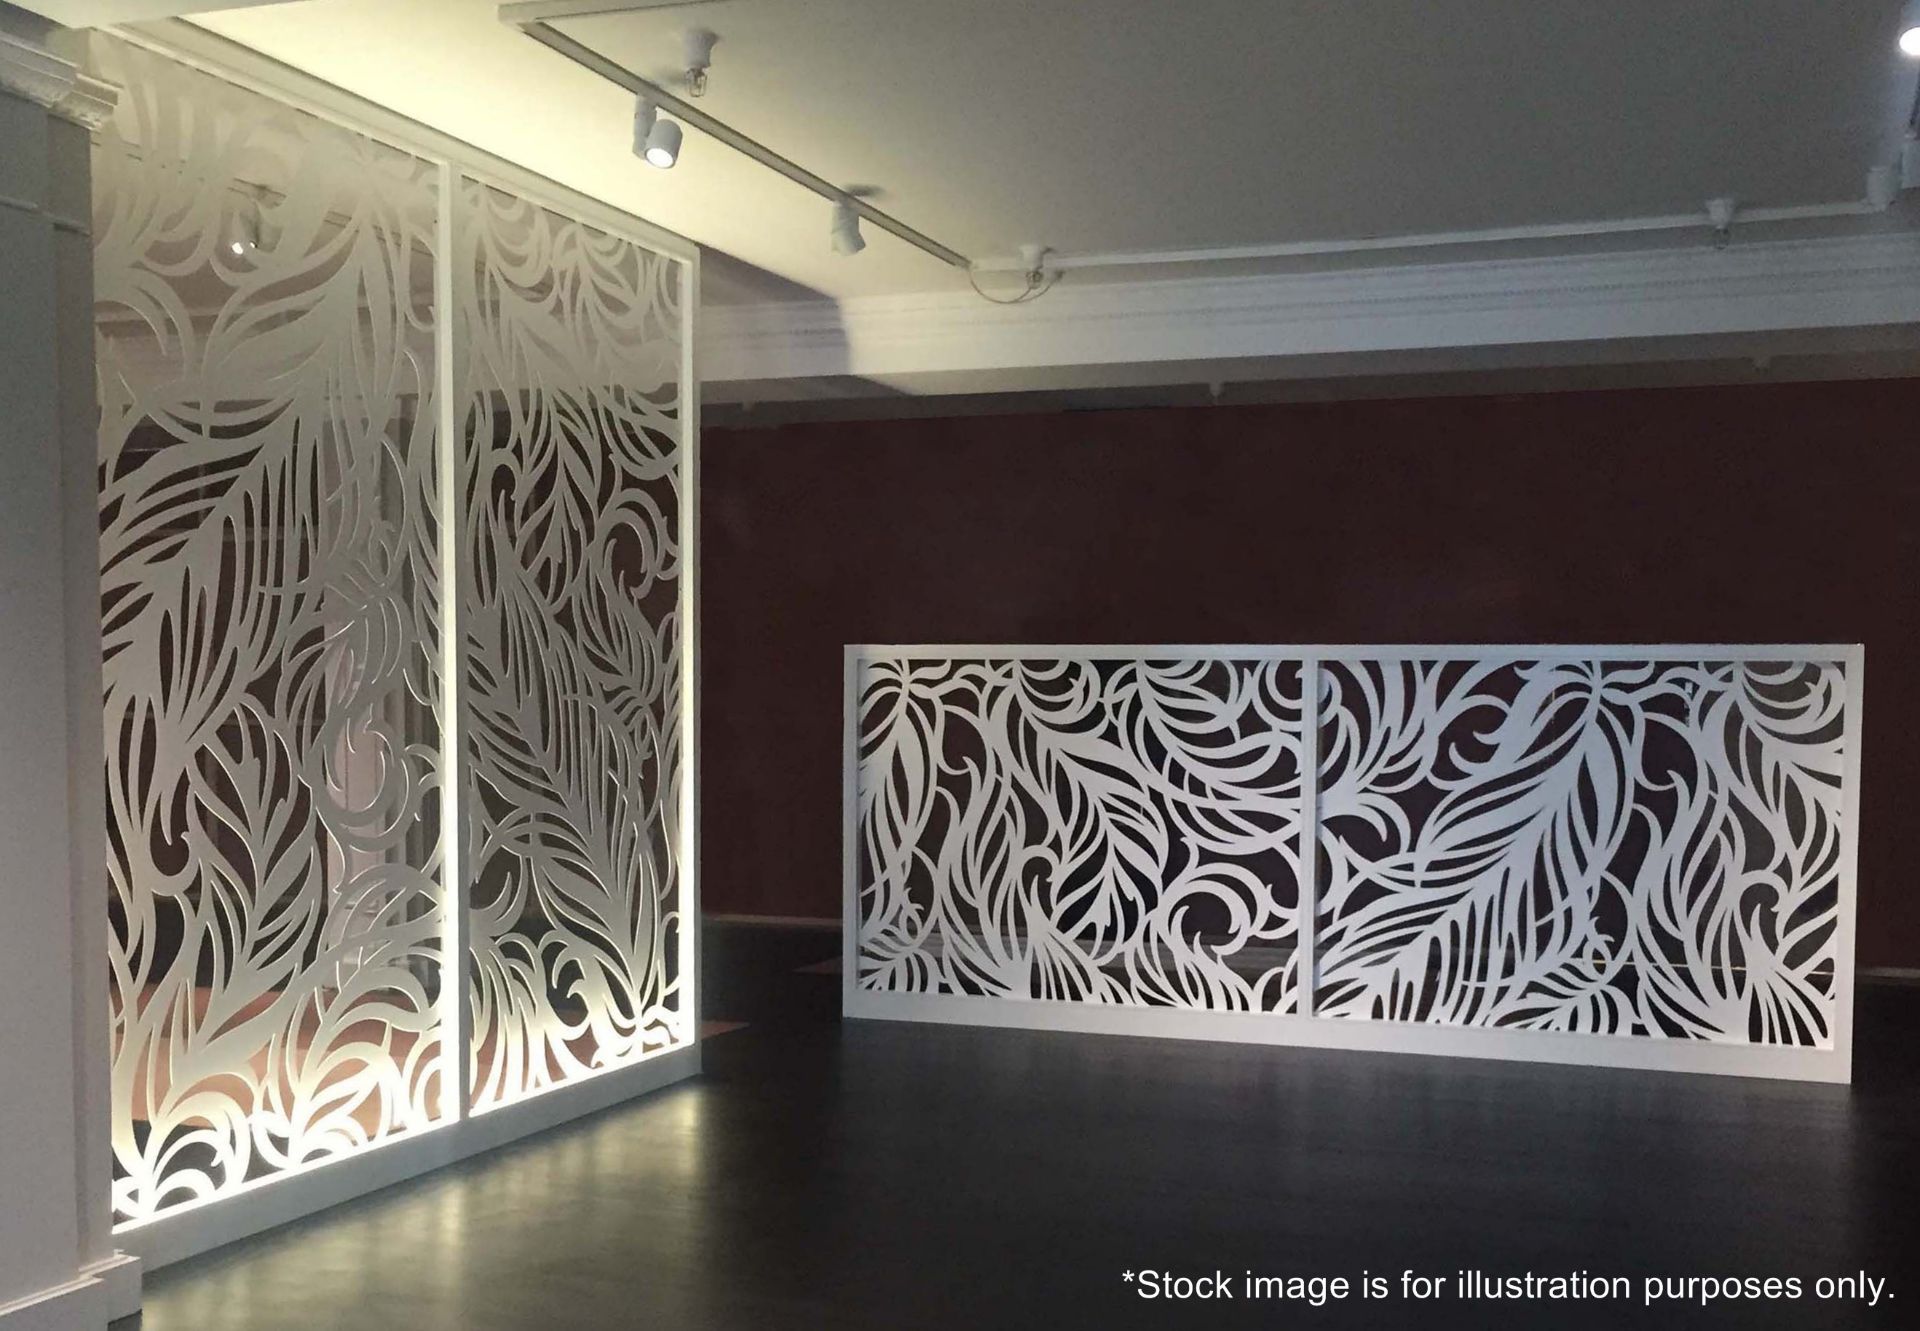 A Pair Of Elegant 'Miles and Lincoln' Framed Laser Cut Metal Room Divider Panels In A Feather Design - Image 2 of 3